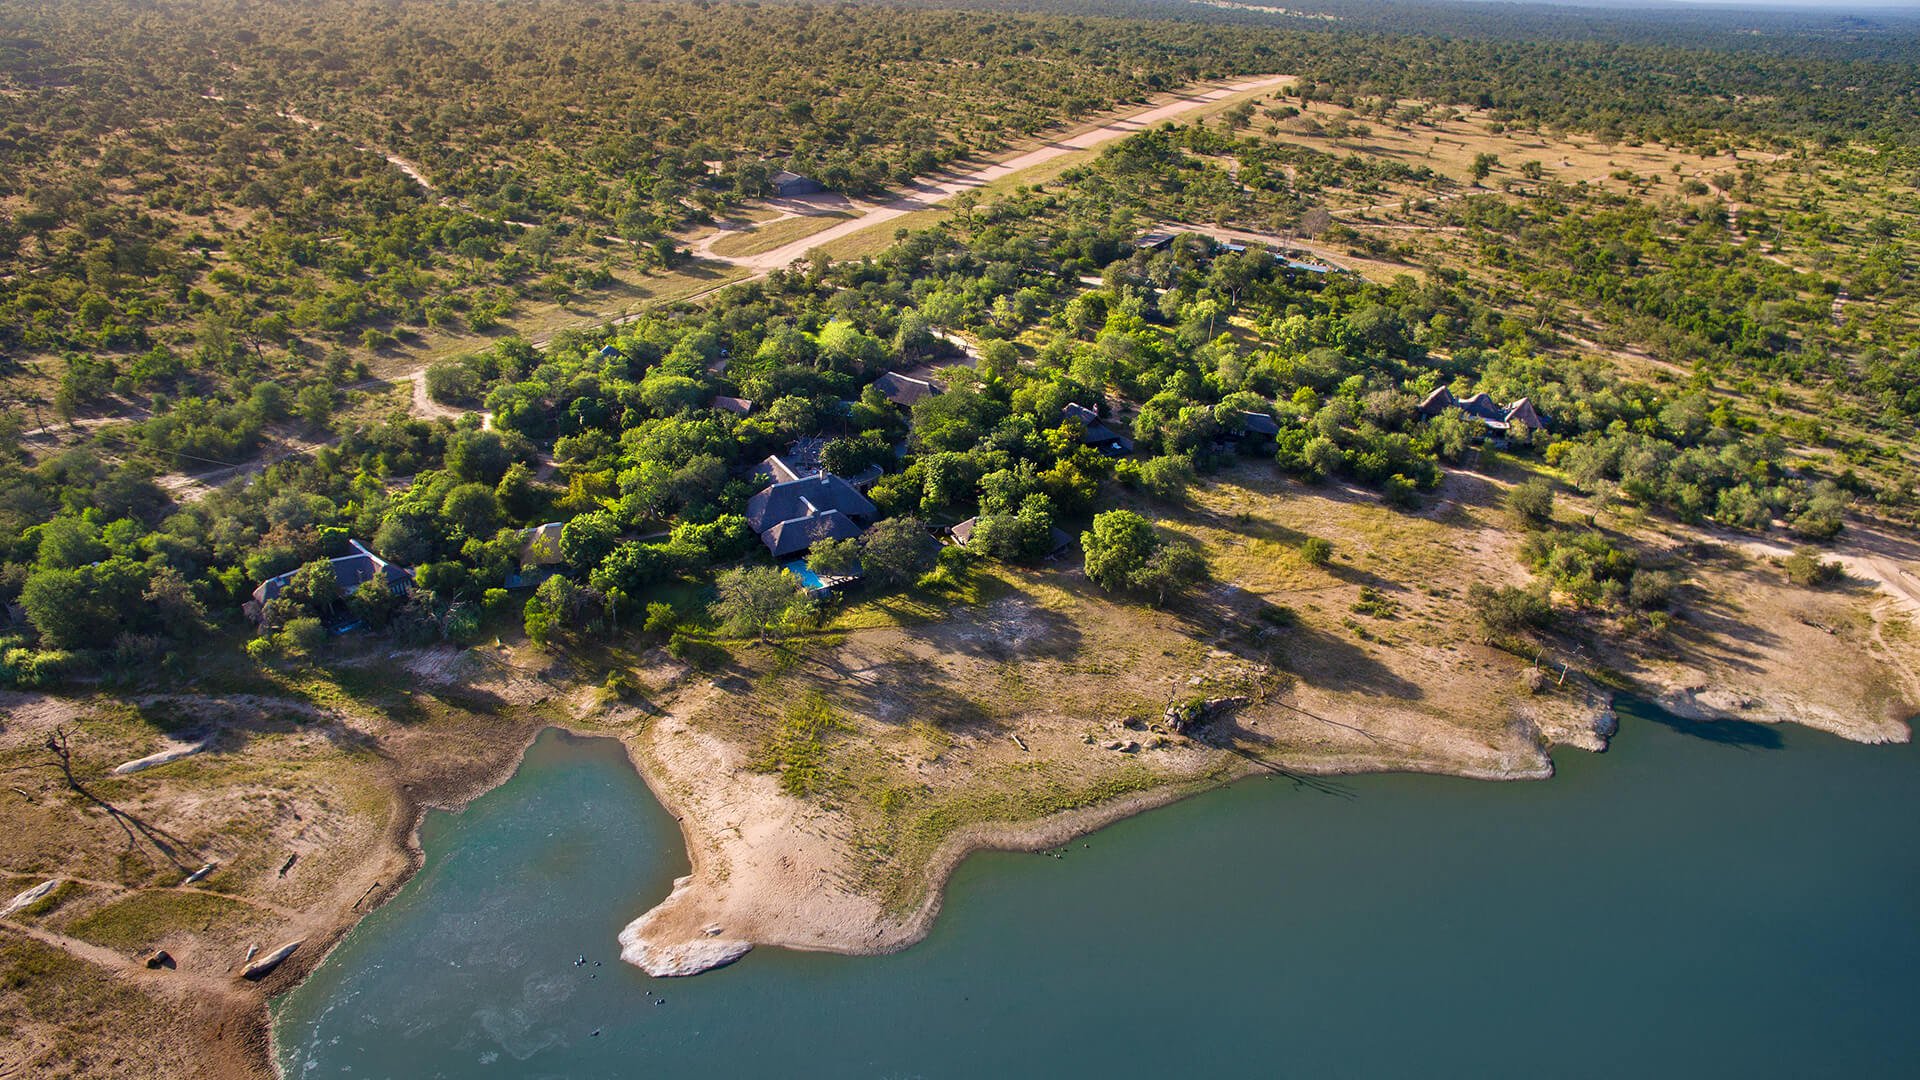 Aerial view of a lush green area with scattered buildings next to a body of water and surrounded by dry land and sparse vegetation. Paths and roads are visible, leading towards the horizon at Chitwa Chitwa a lodge perfect for a safari elopement